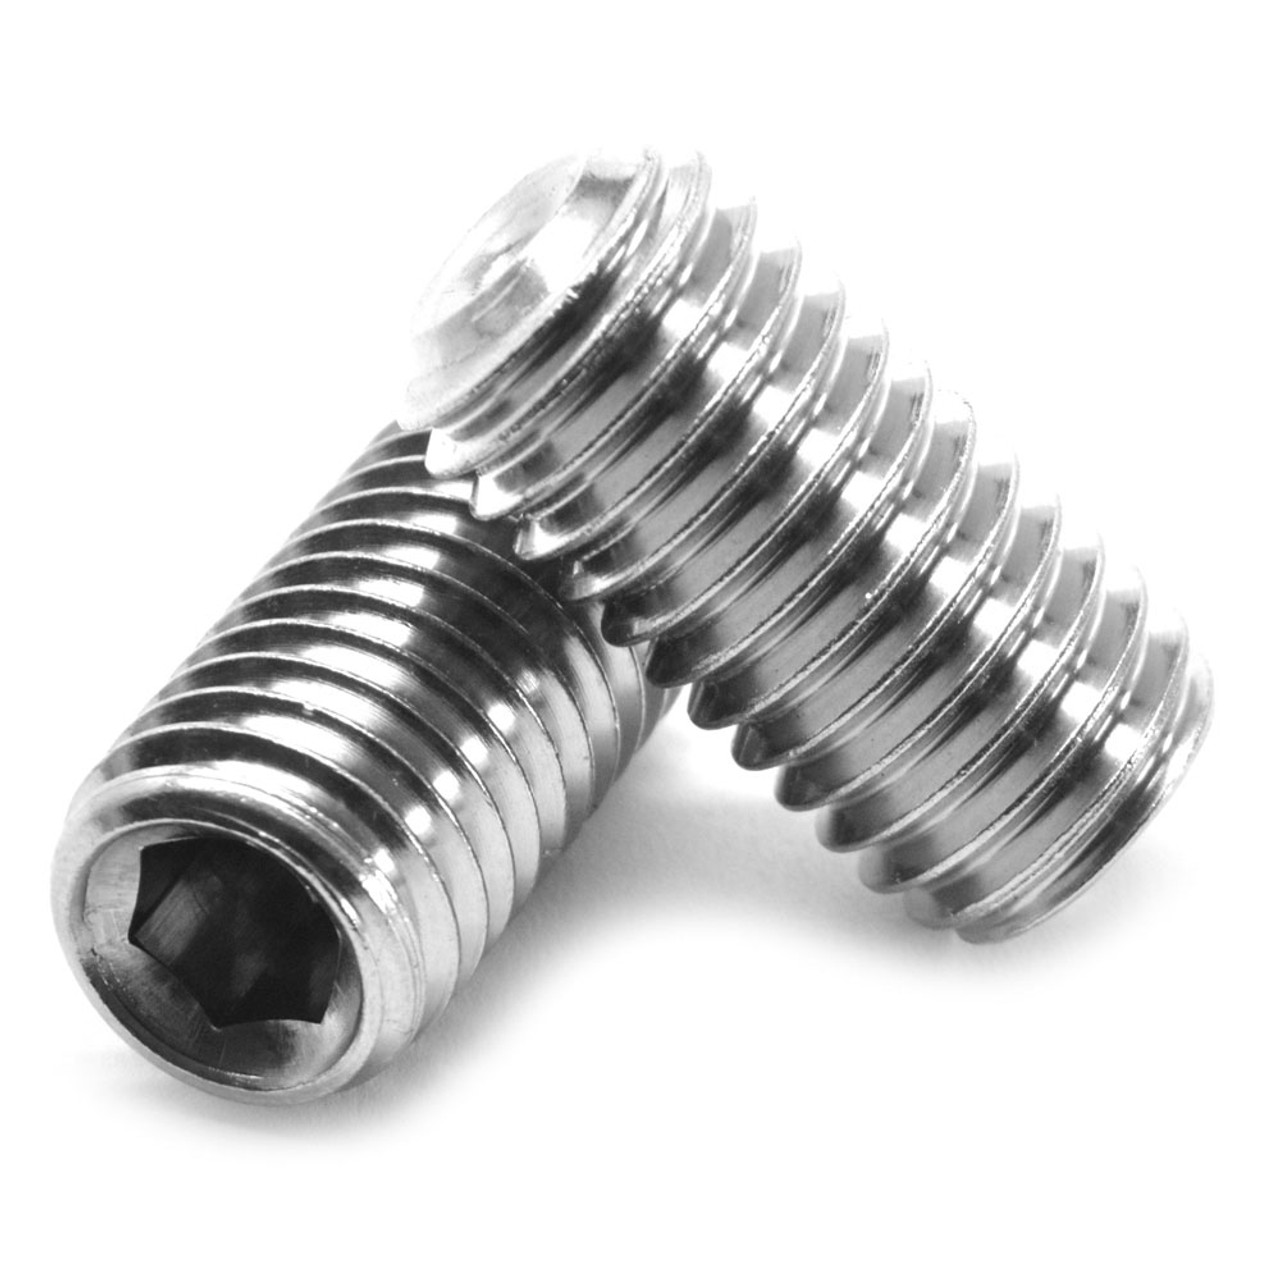 M10 x 1.50 x 10 MM Coarse Thread DIN 916 / ISO 4029 Socket Set Screw Cup Point Stainless Steel 316